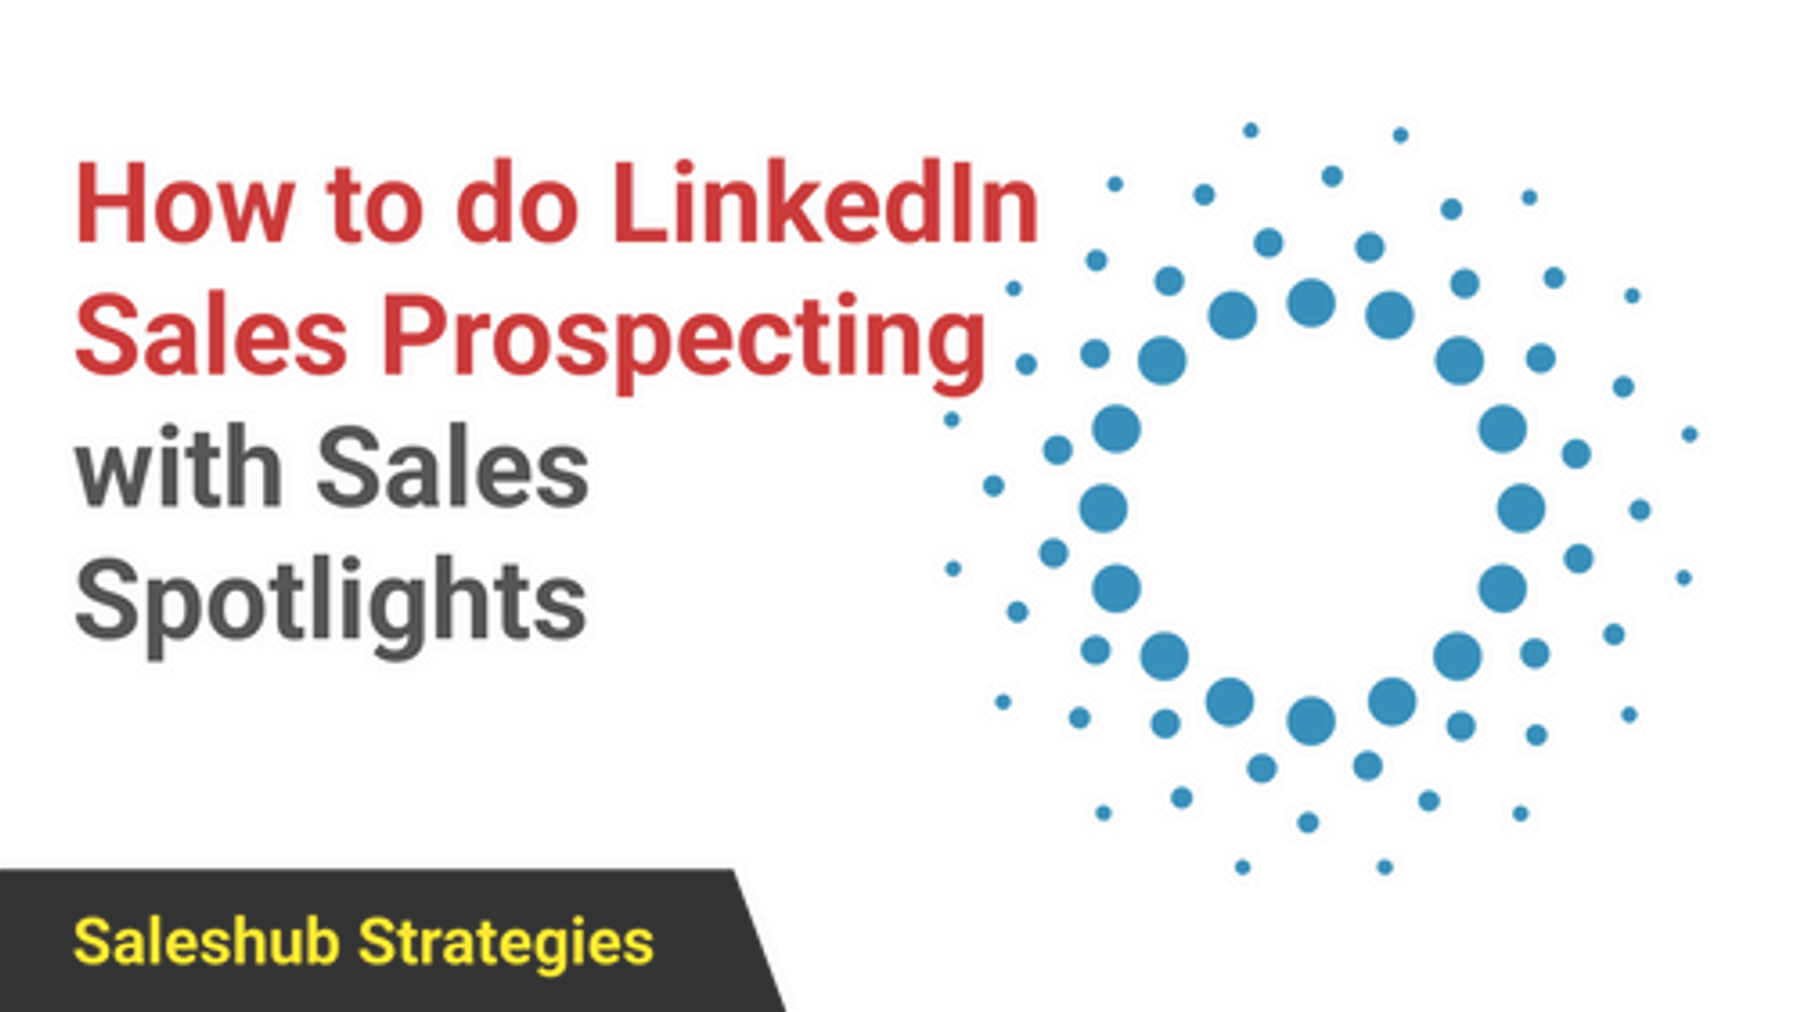 How to do LinkedIn Sales Prospecting with Sales Spotlights